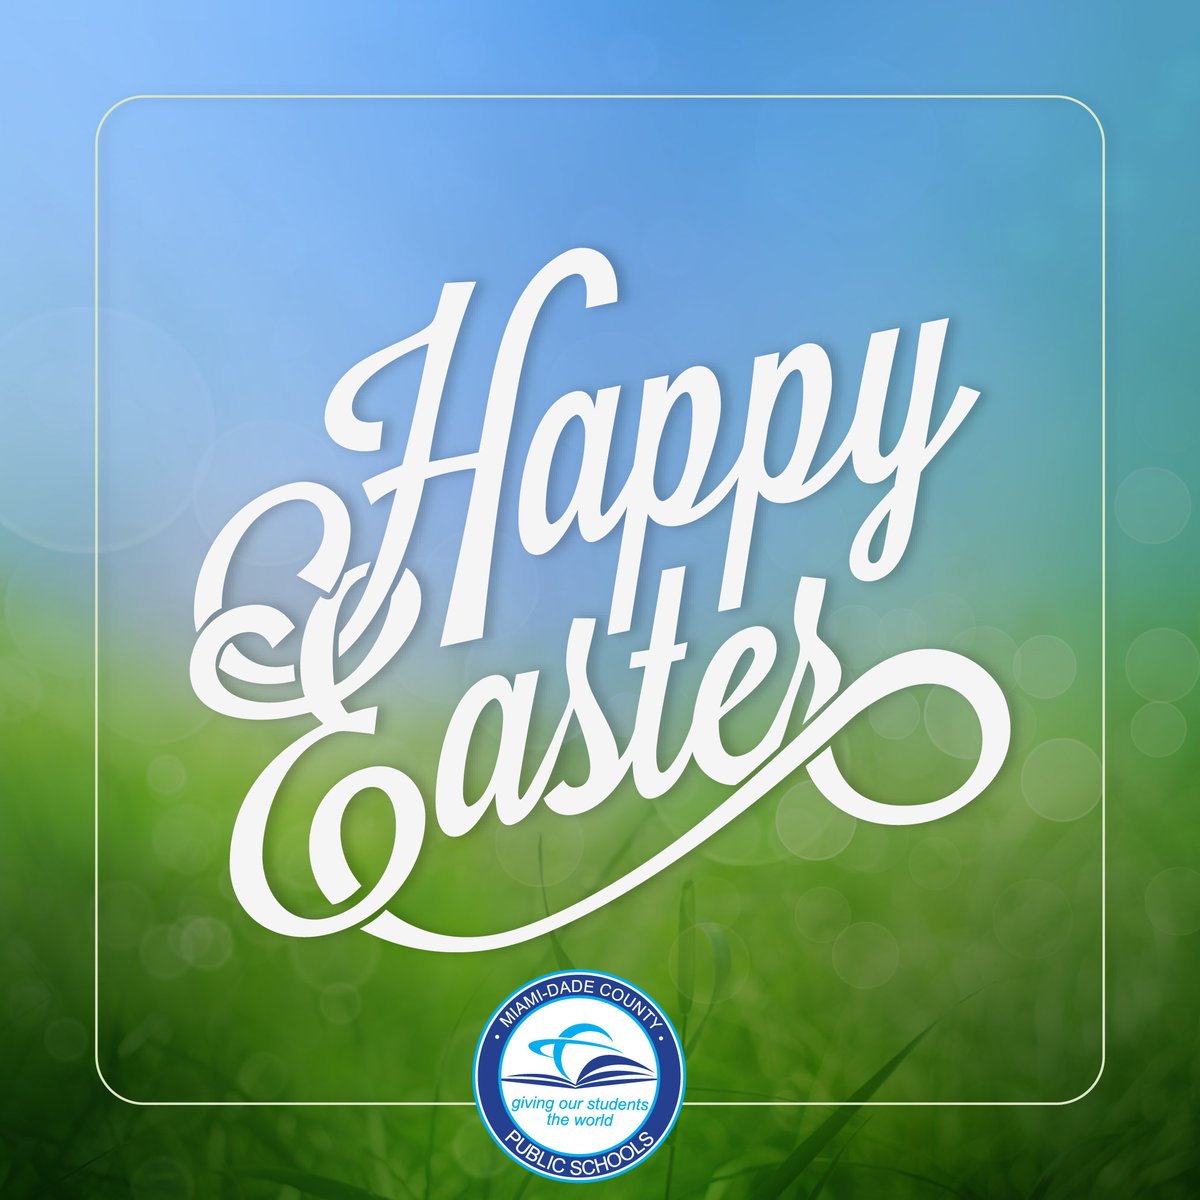 Wishing everyone a joyful and peaceful Easter! May this special day be filled with cherished moments with loved ones. #HappyEaster